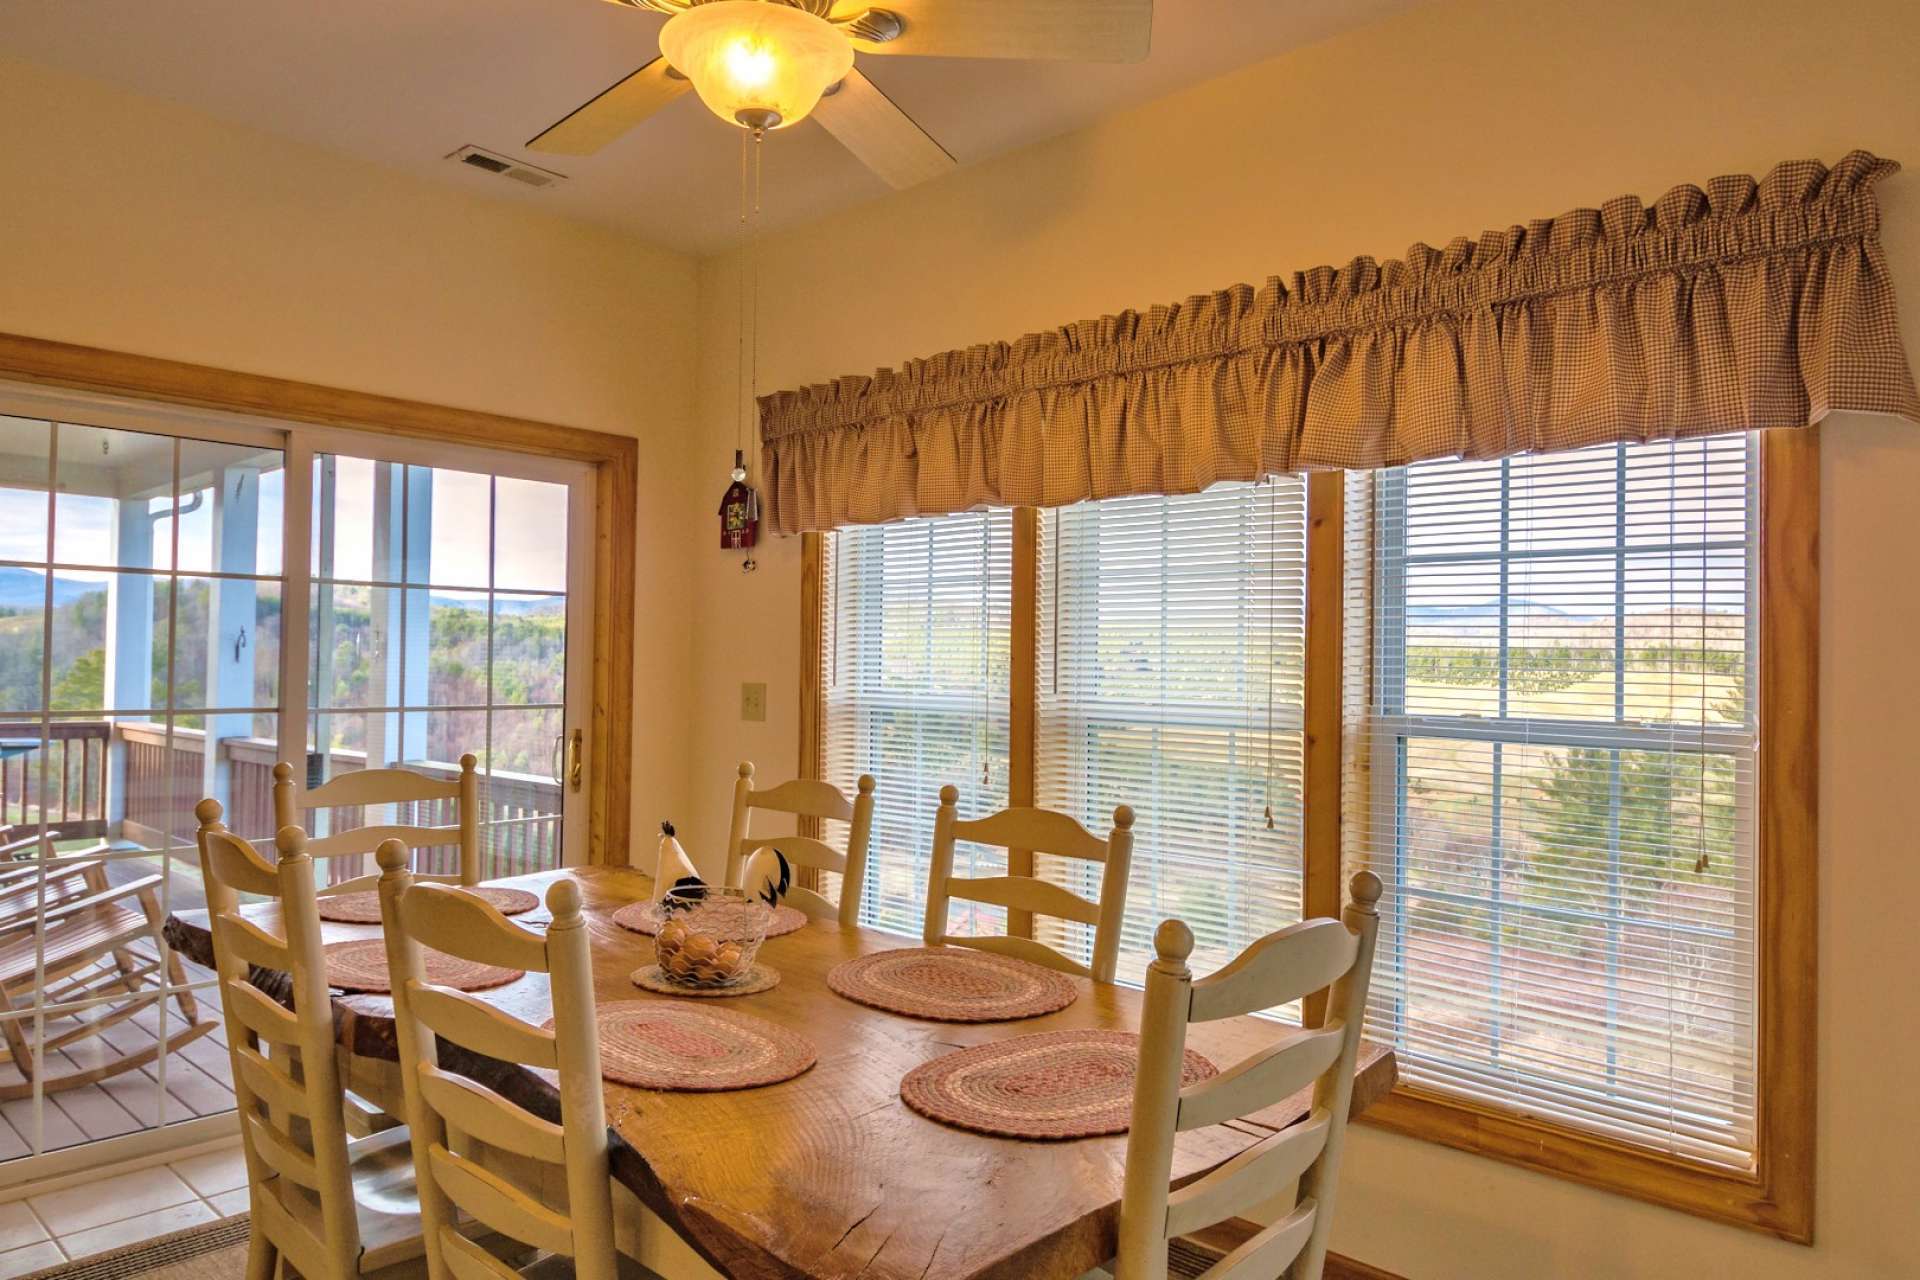 The dining area also allows you to enjoy the outdoor scenery when dining inside.